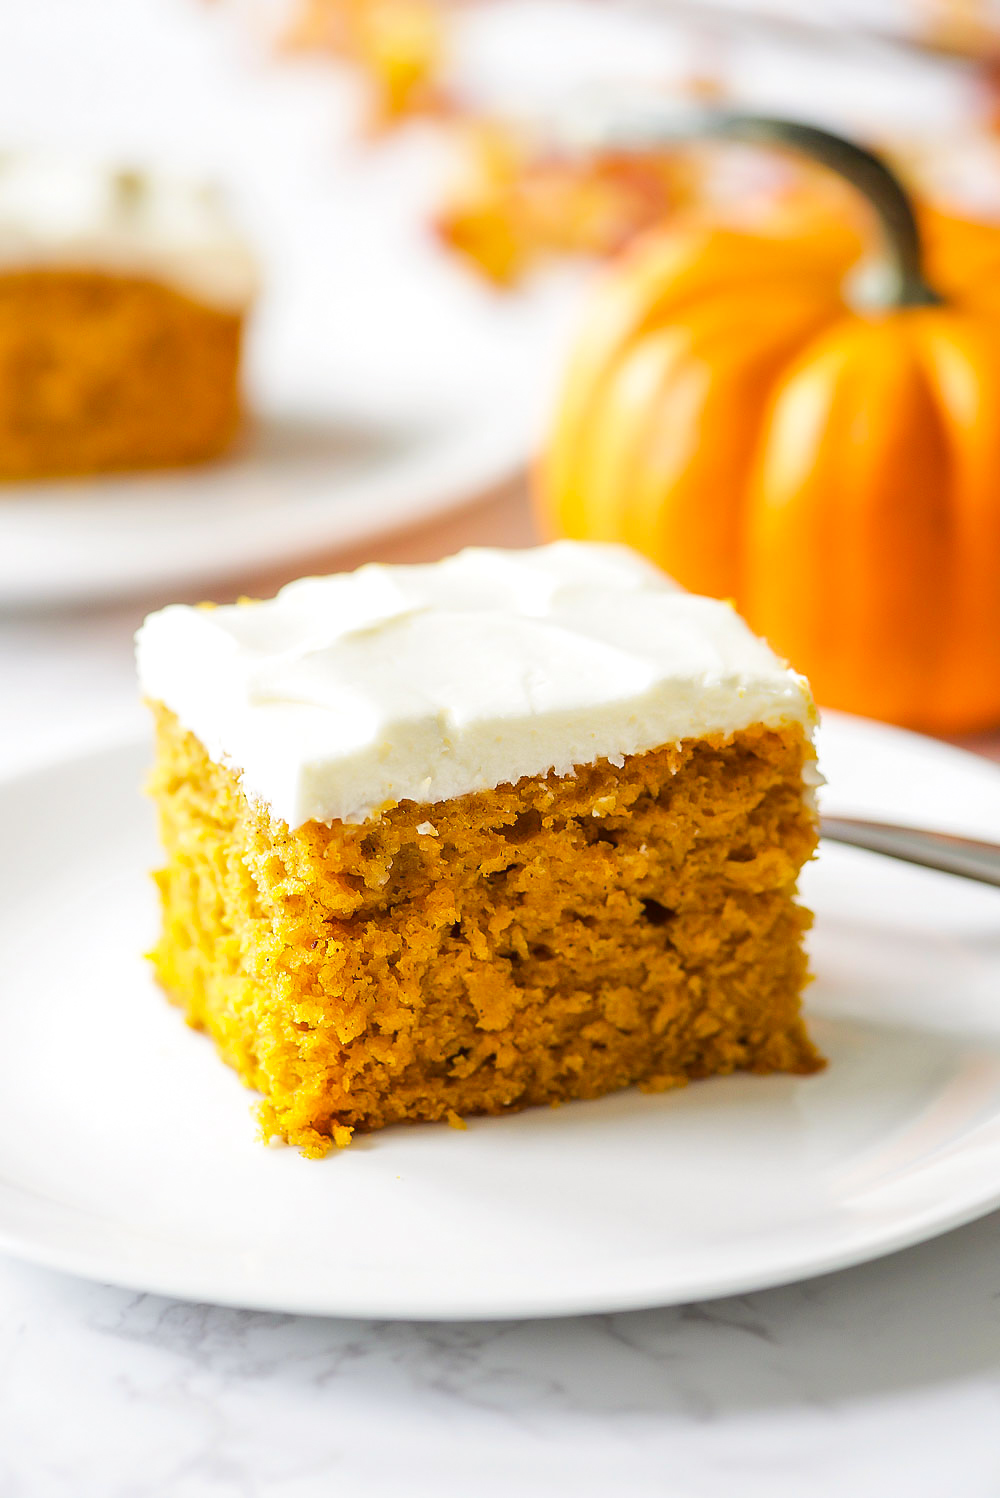 Pumpkin Cake with Cream Cheese frosting is a moist and fluffy pumpkin cake with the perfect cream cheese frosting topping it. Life-in-the-Lofthouse.com